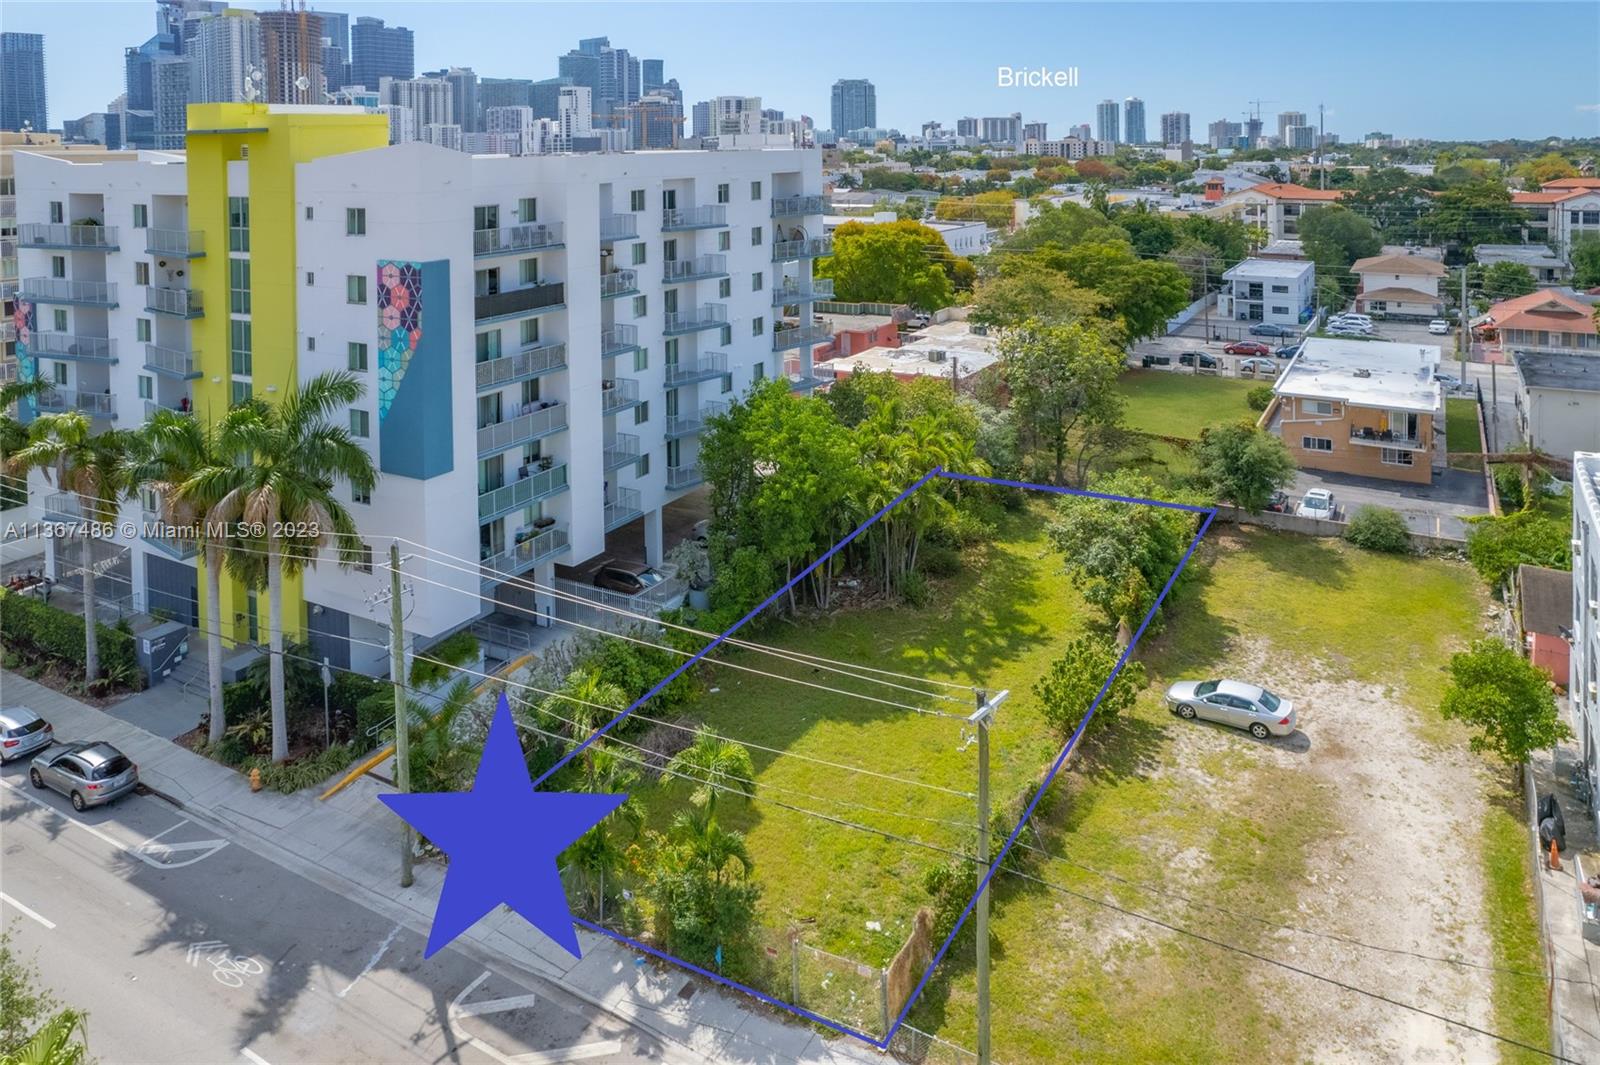 7,500 SF Miami Lot nearly approved for 22 units.